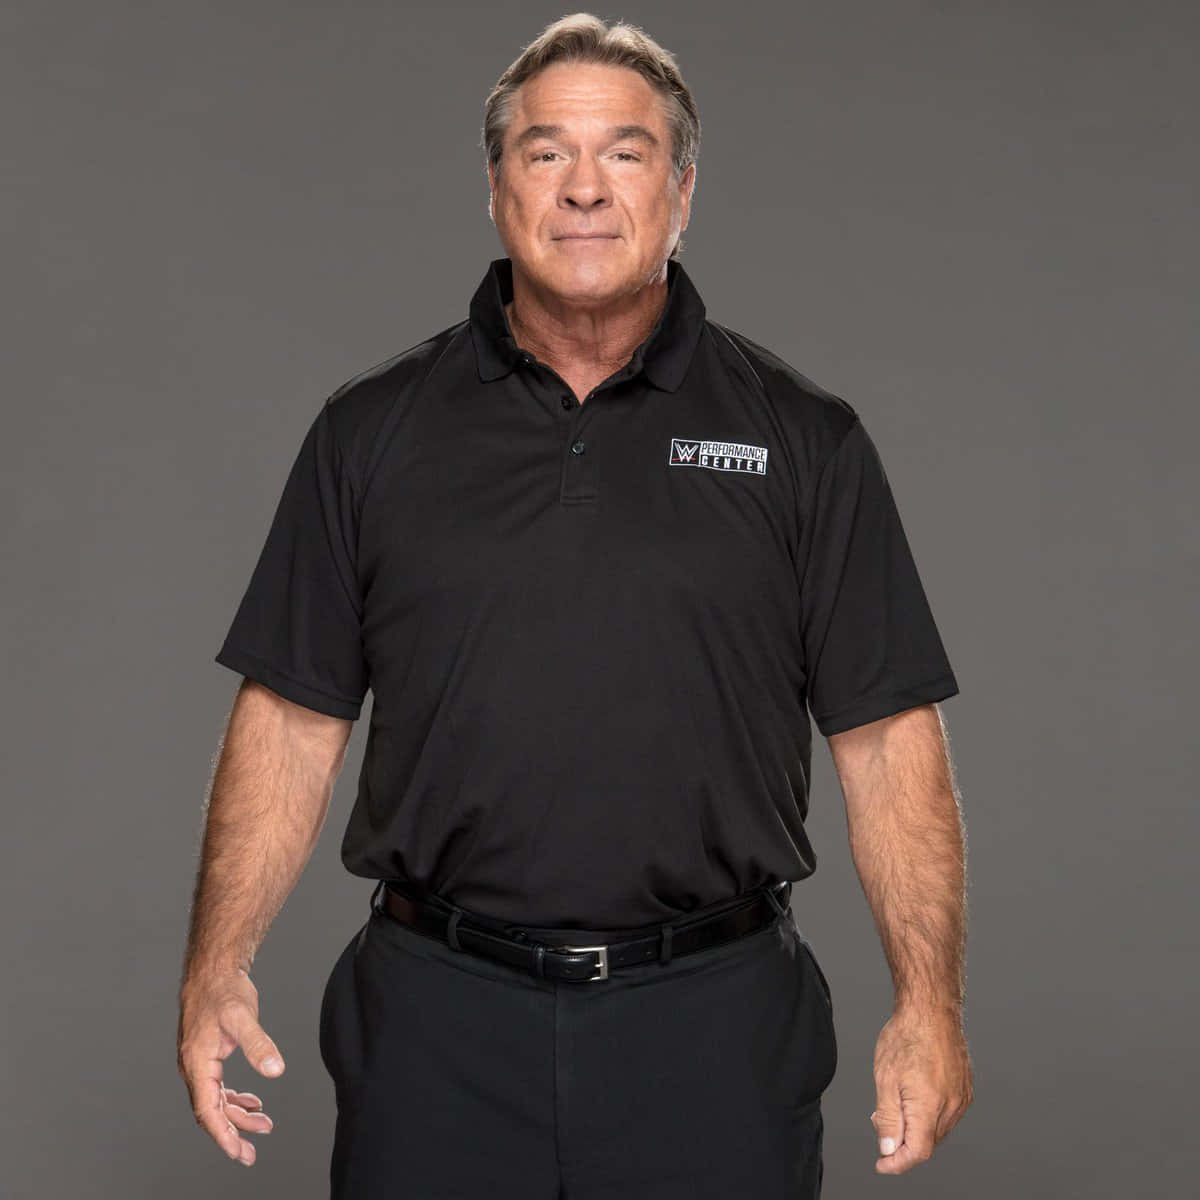 Terry Taylor NXT Trainer Wallpaper